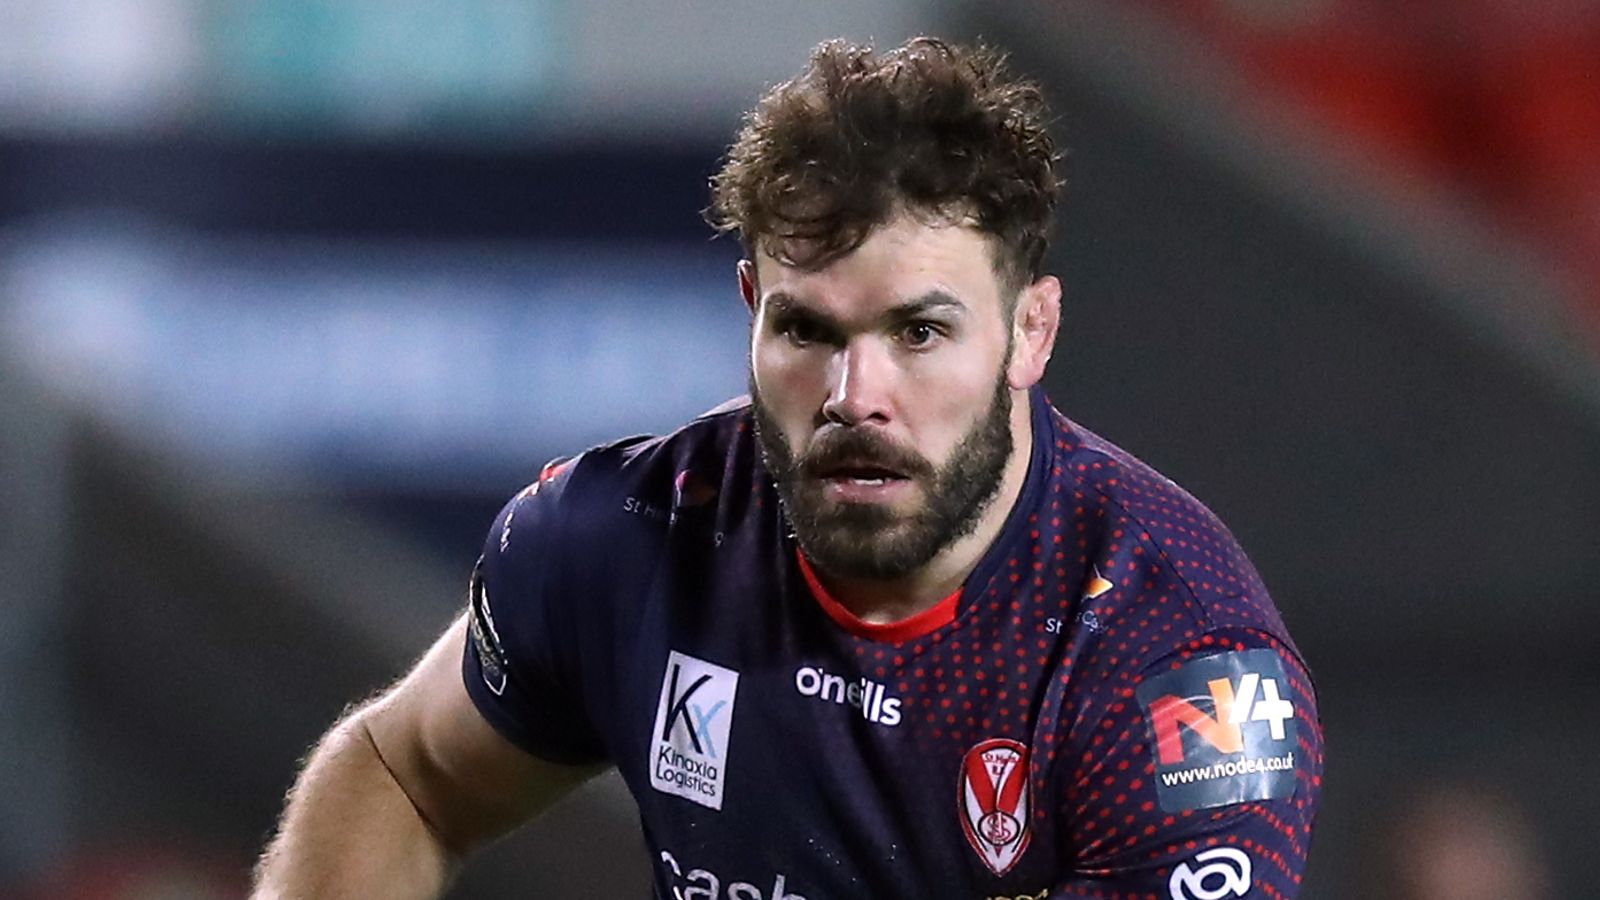 RL news and gossip: St Helens prop Alex Walmsley ruled out of Rugby League World Cup